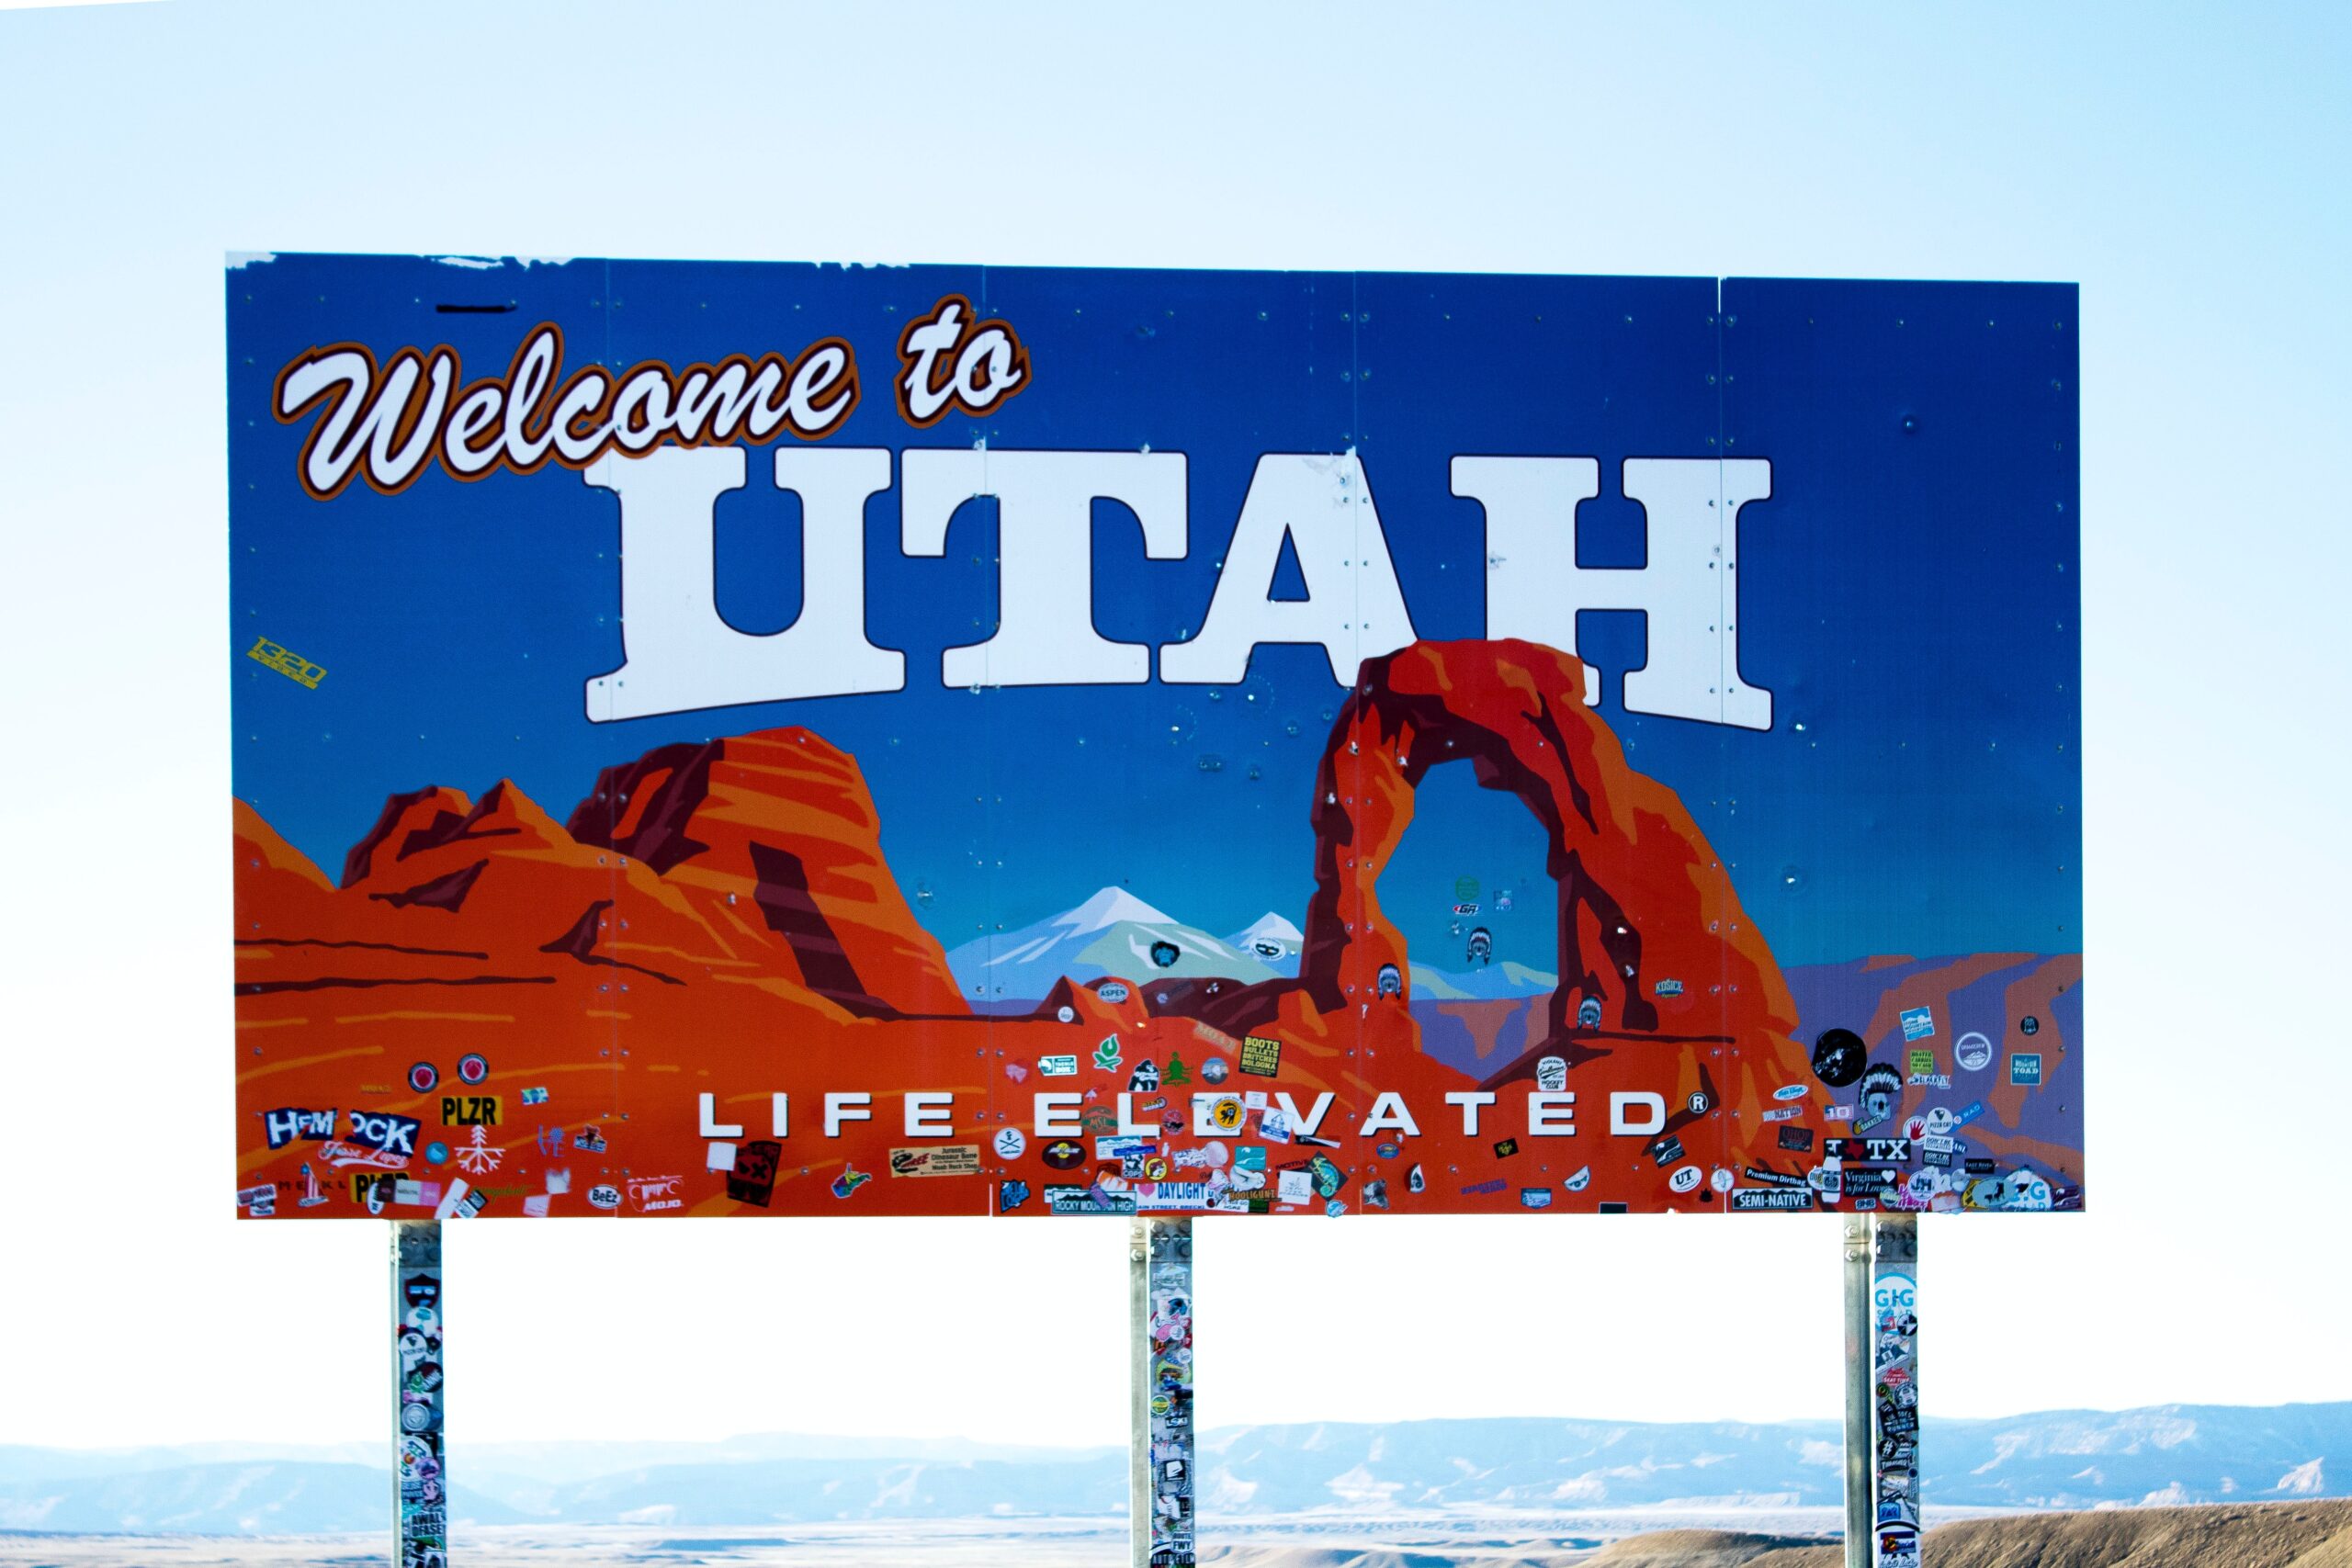 Welcome to Utah billboard with red rocks against a blue sky